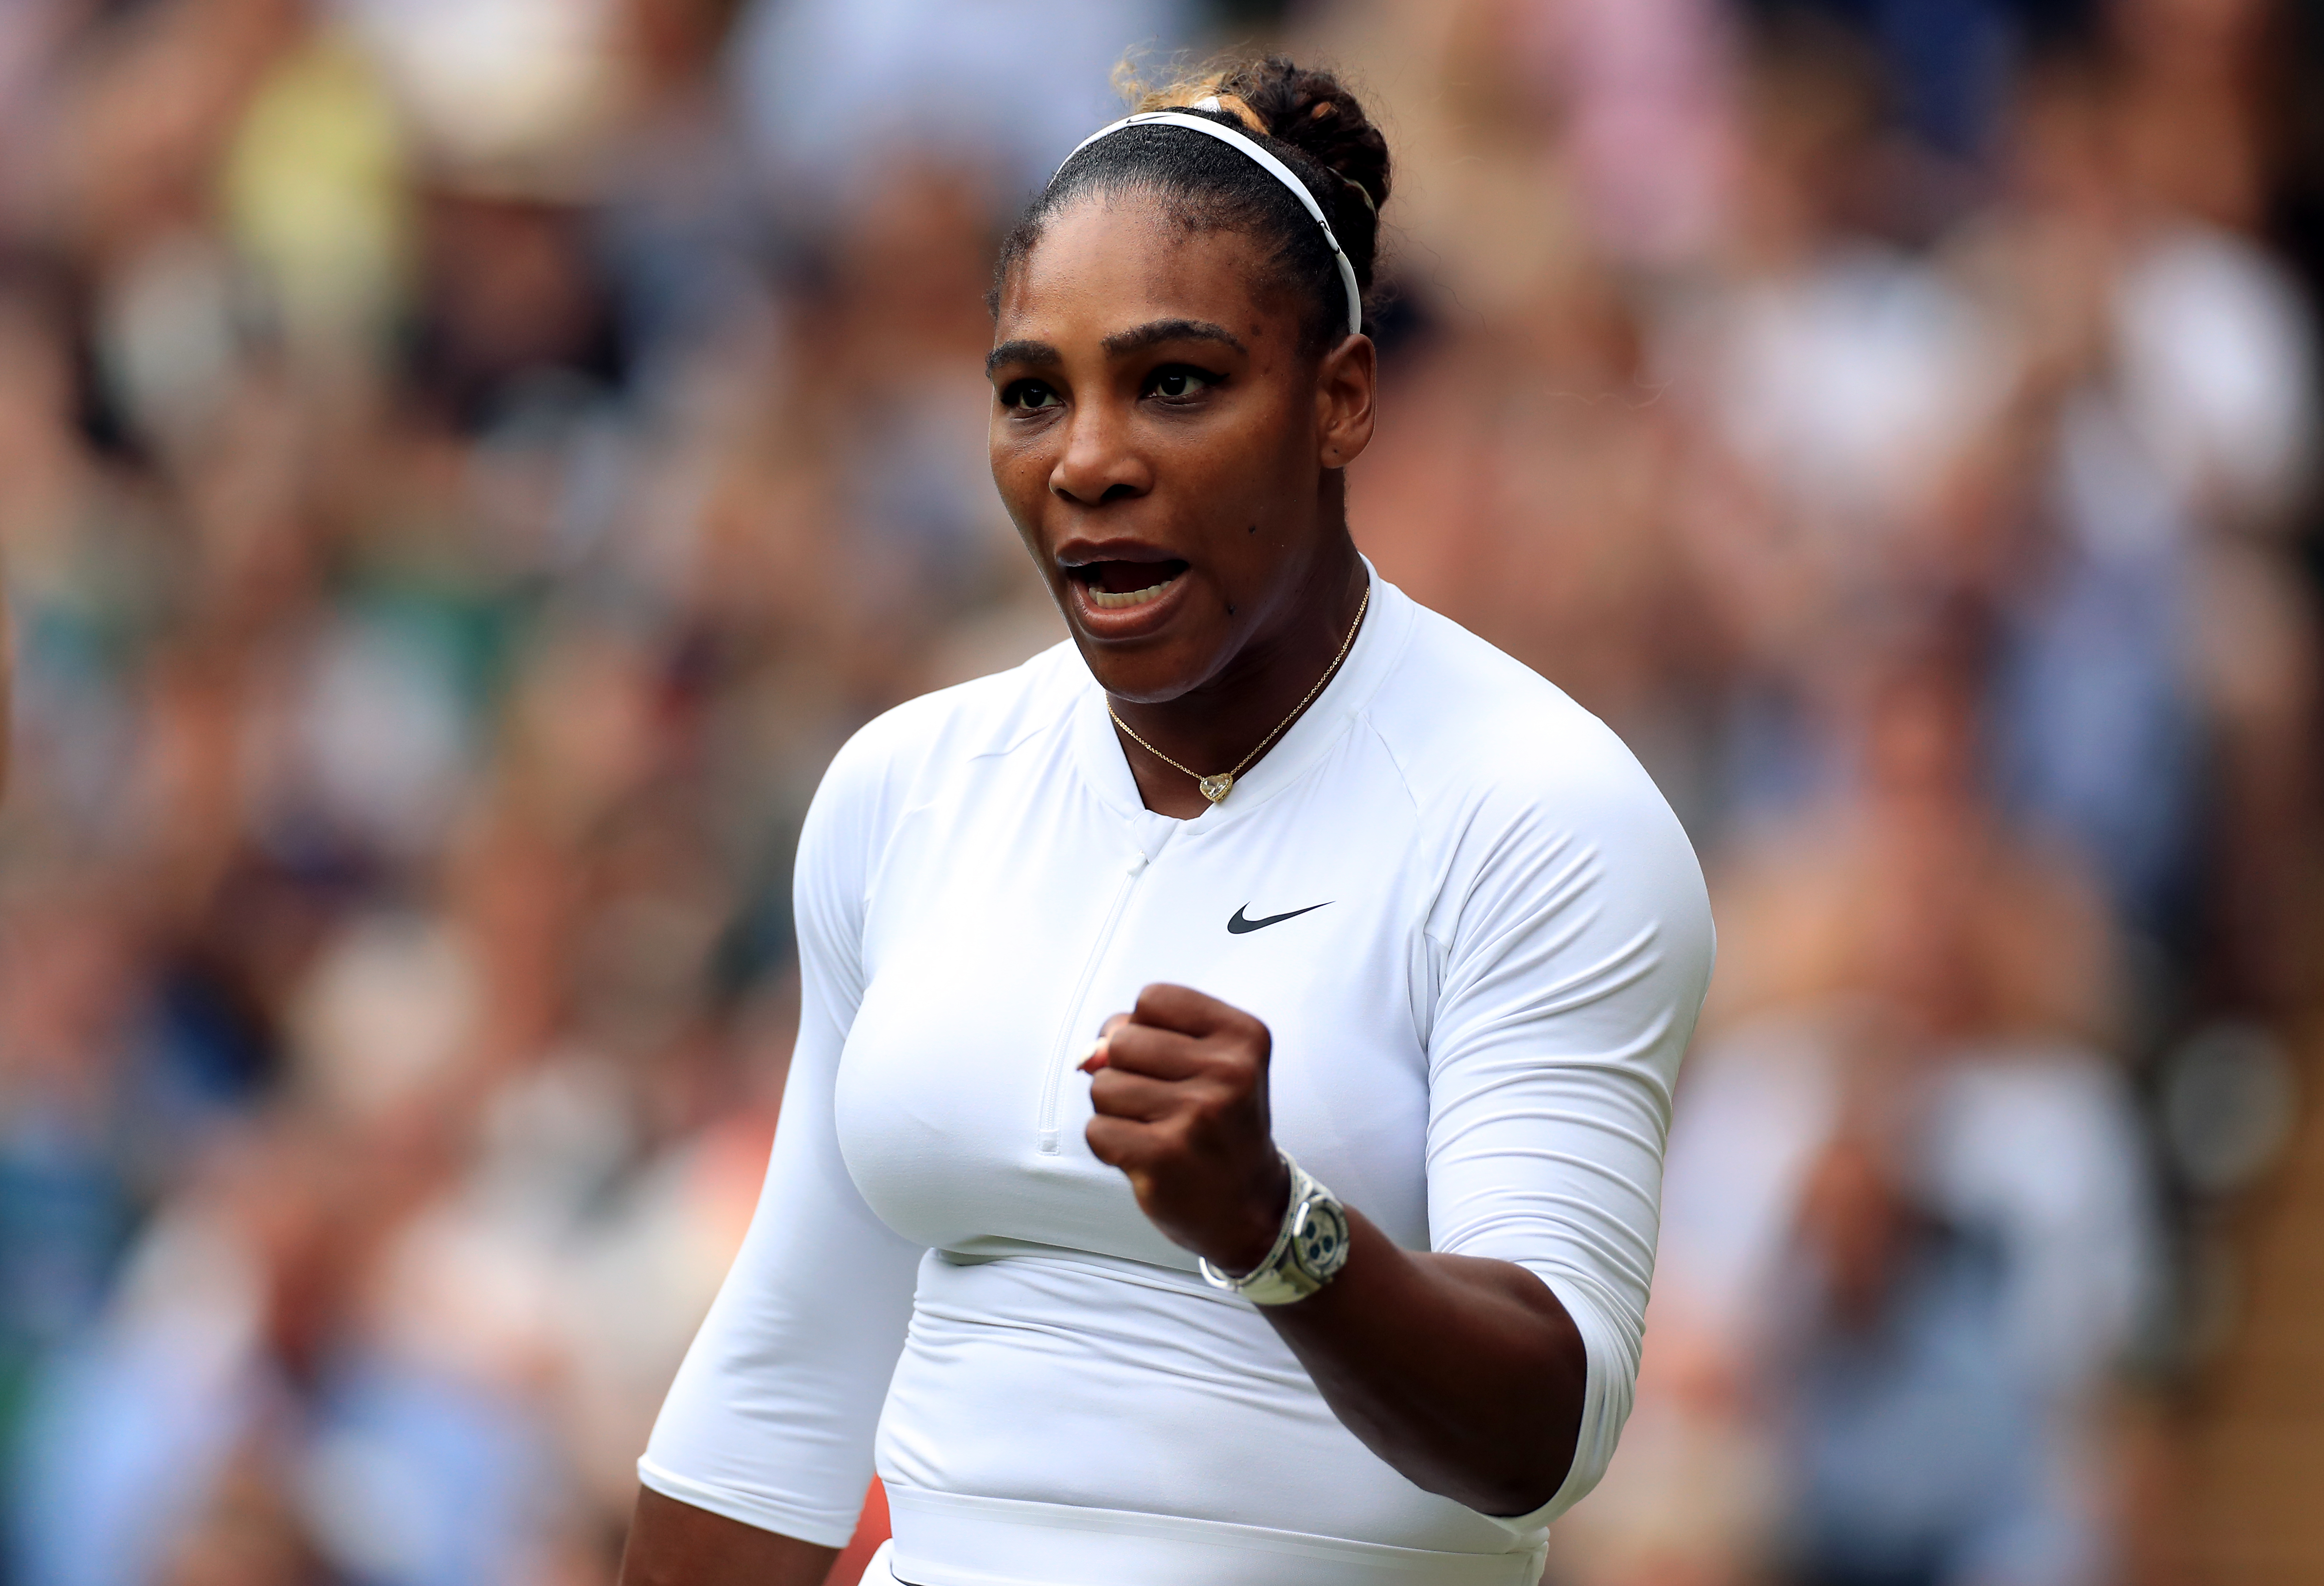 Serena Williams during her mixed doubles match with Andy Murray on day eight of the Wimbledon Championships at the All England Lawn Tennis and Croquet Club, Wimbledon.